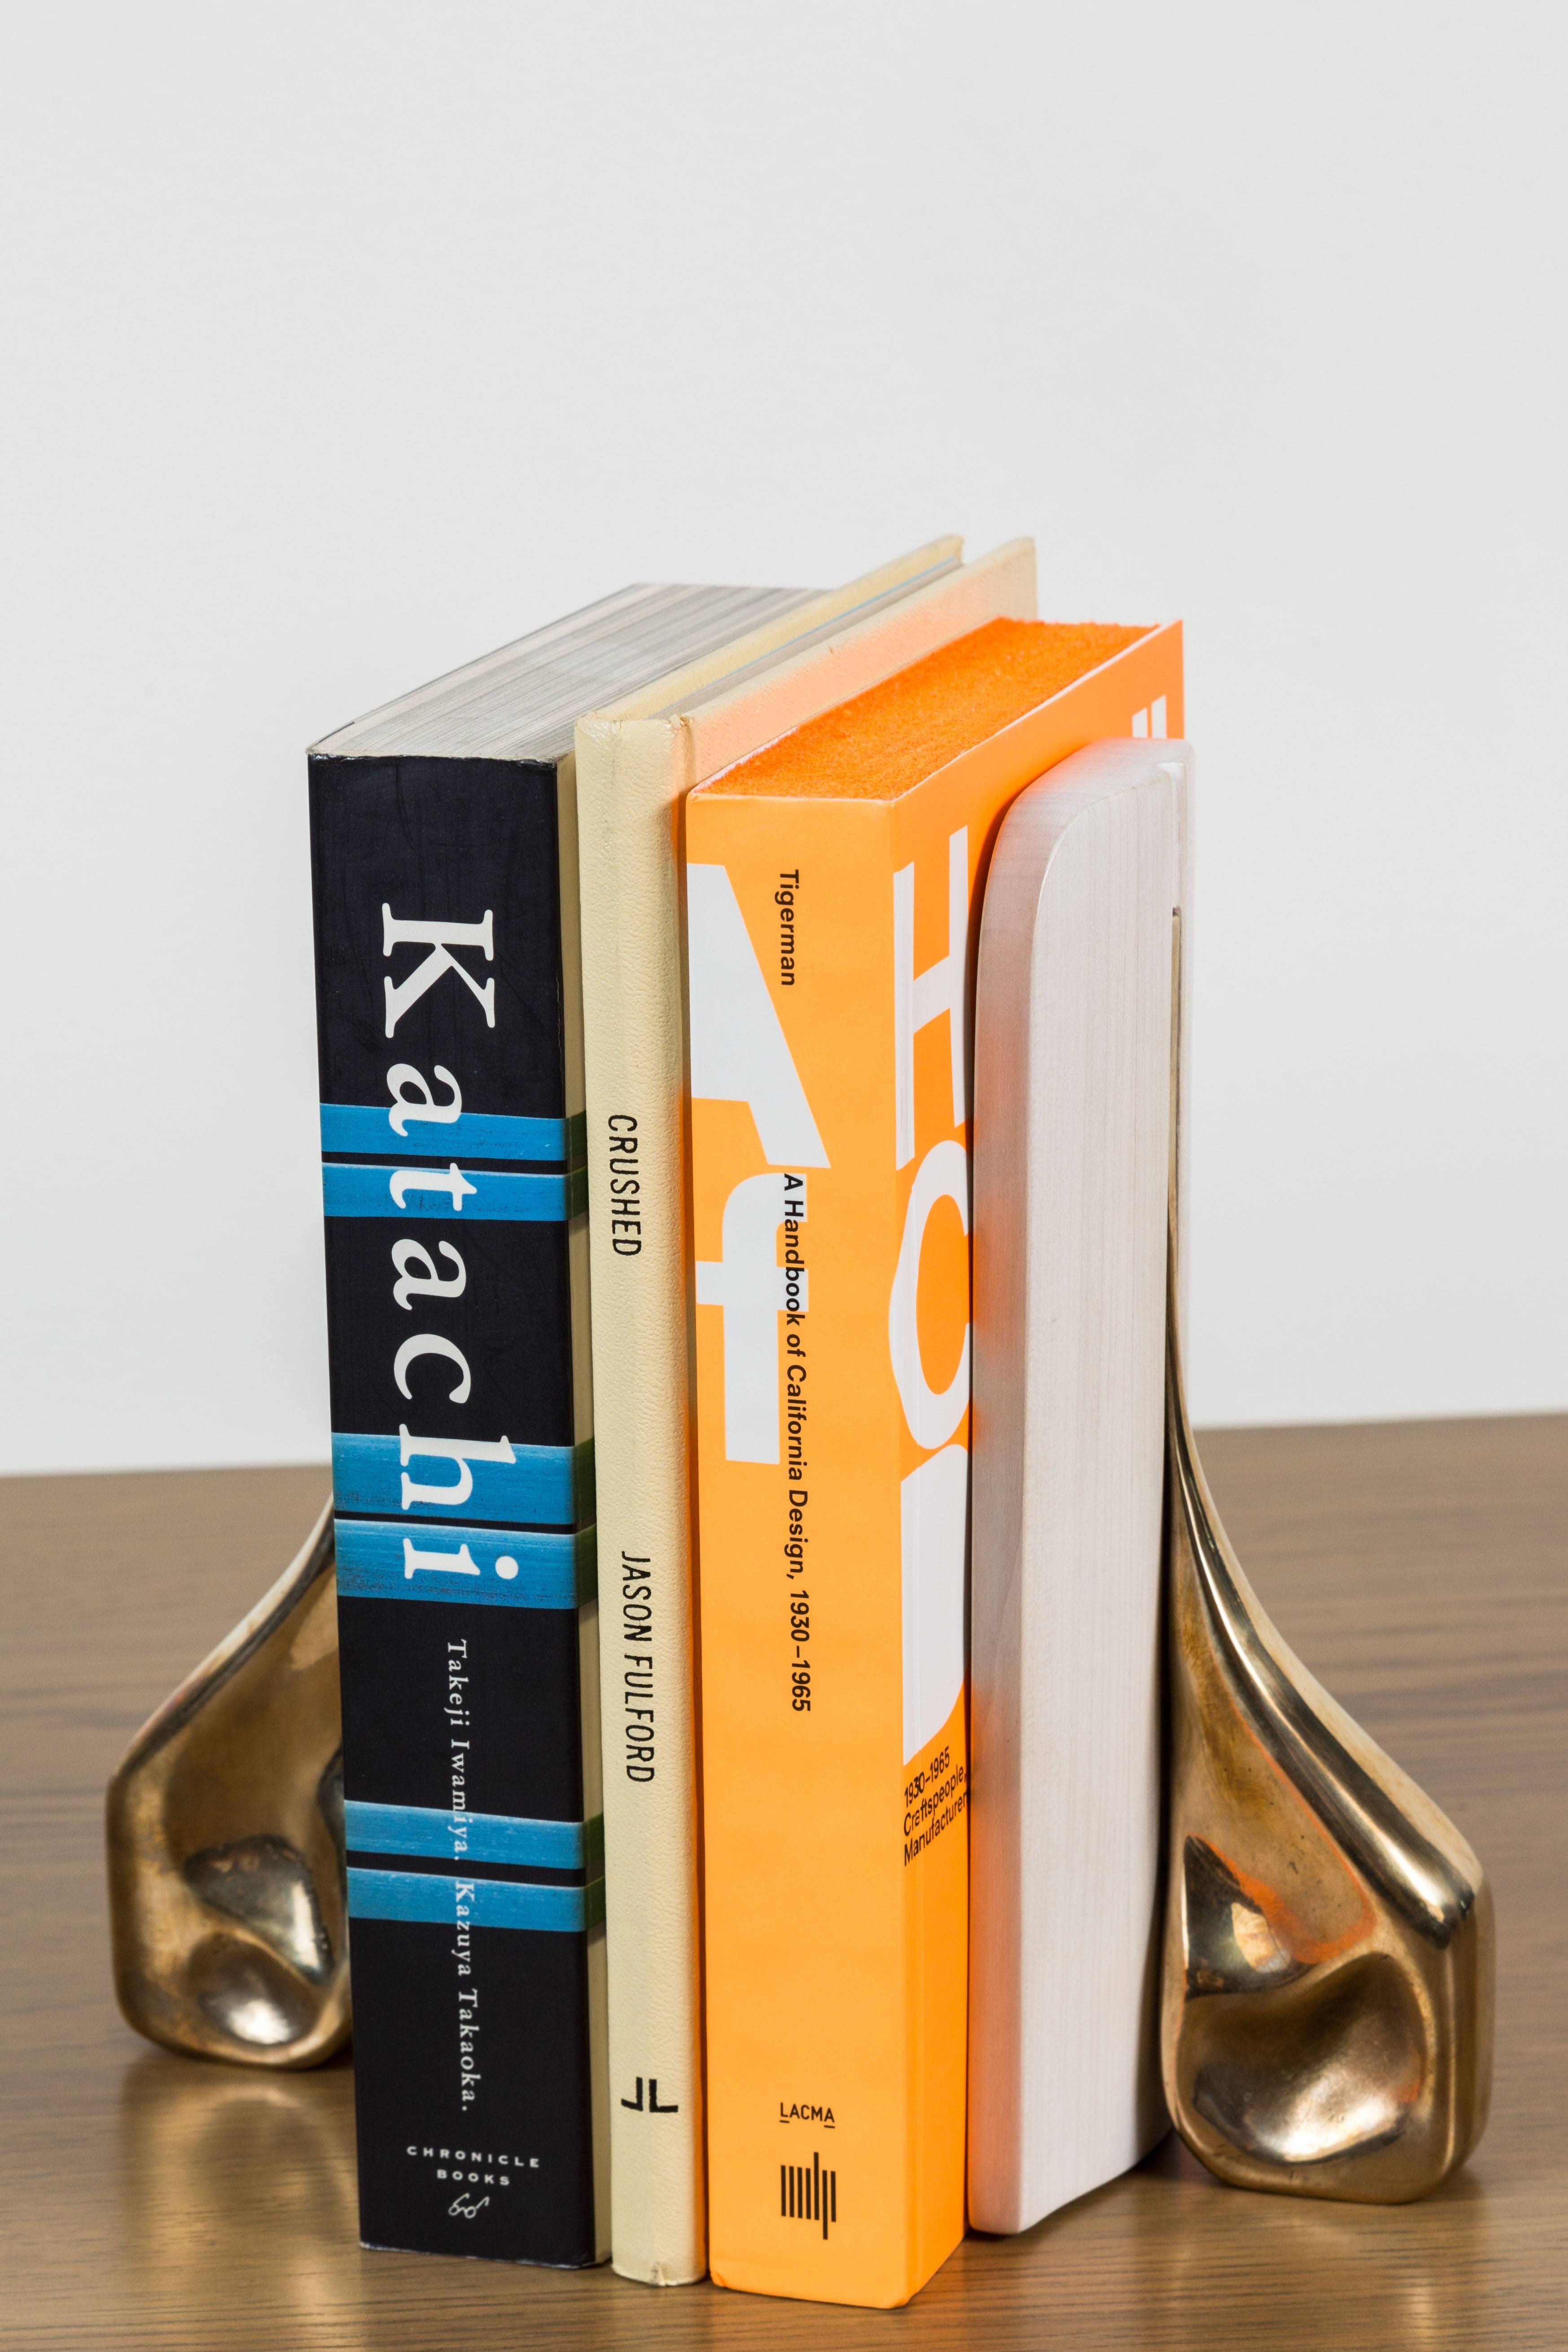 American Pair of White Maple and Cast Bronze Bookends by Vincent Pocsik, In Stock